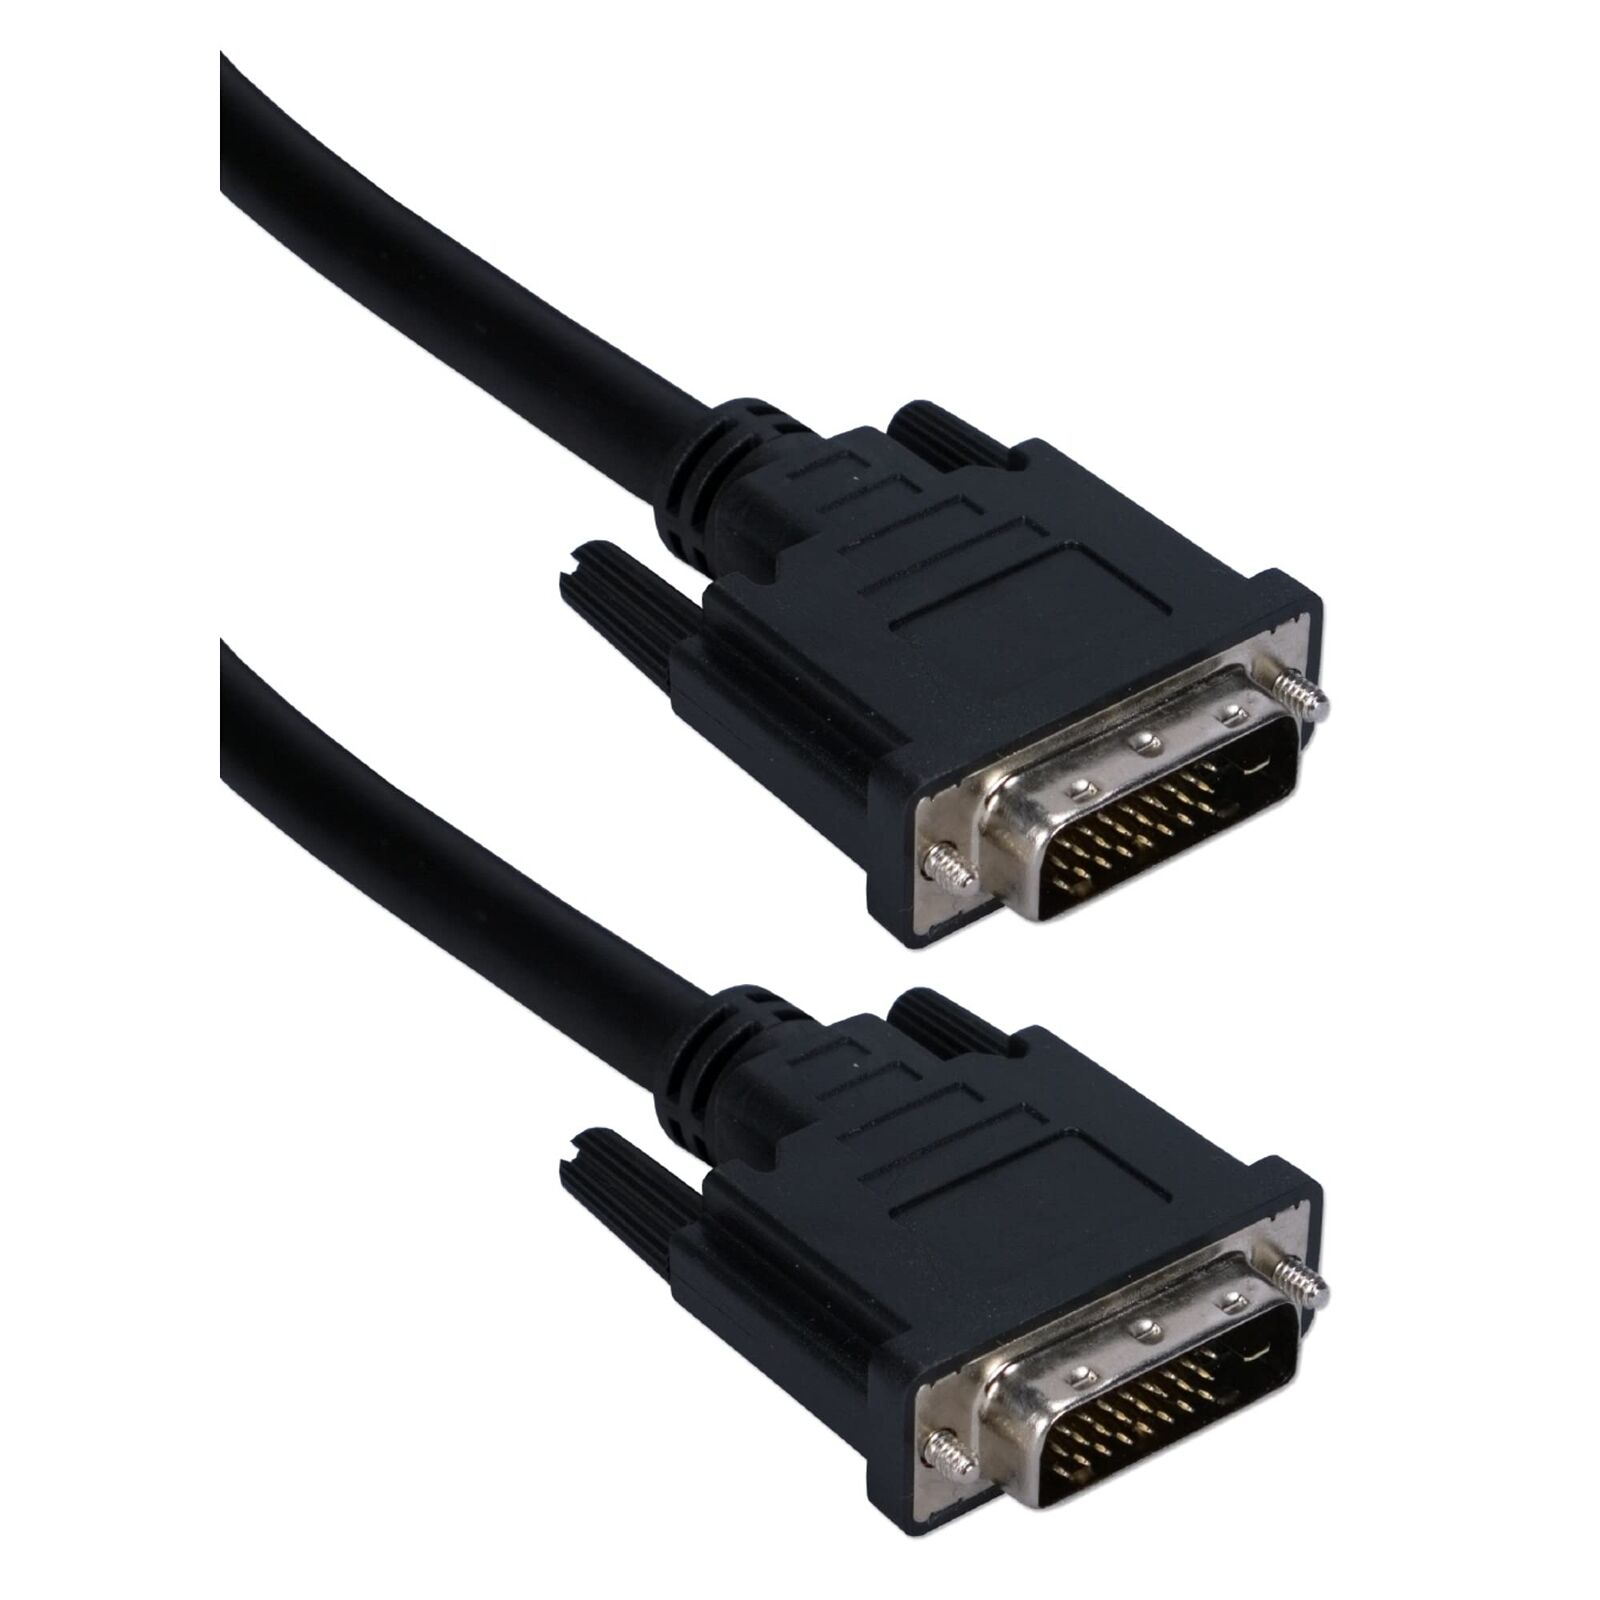 CFDD-D10 Male to Male Standard DVI Cable ? 10 Feet